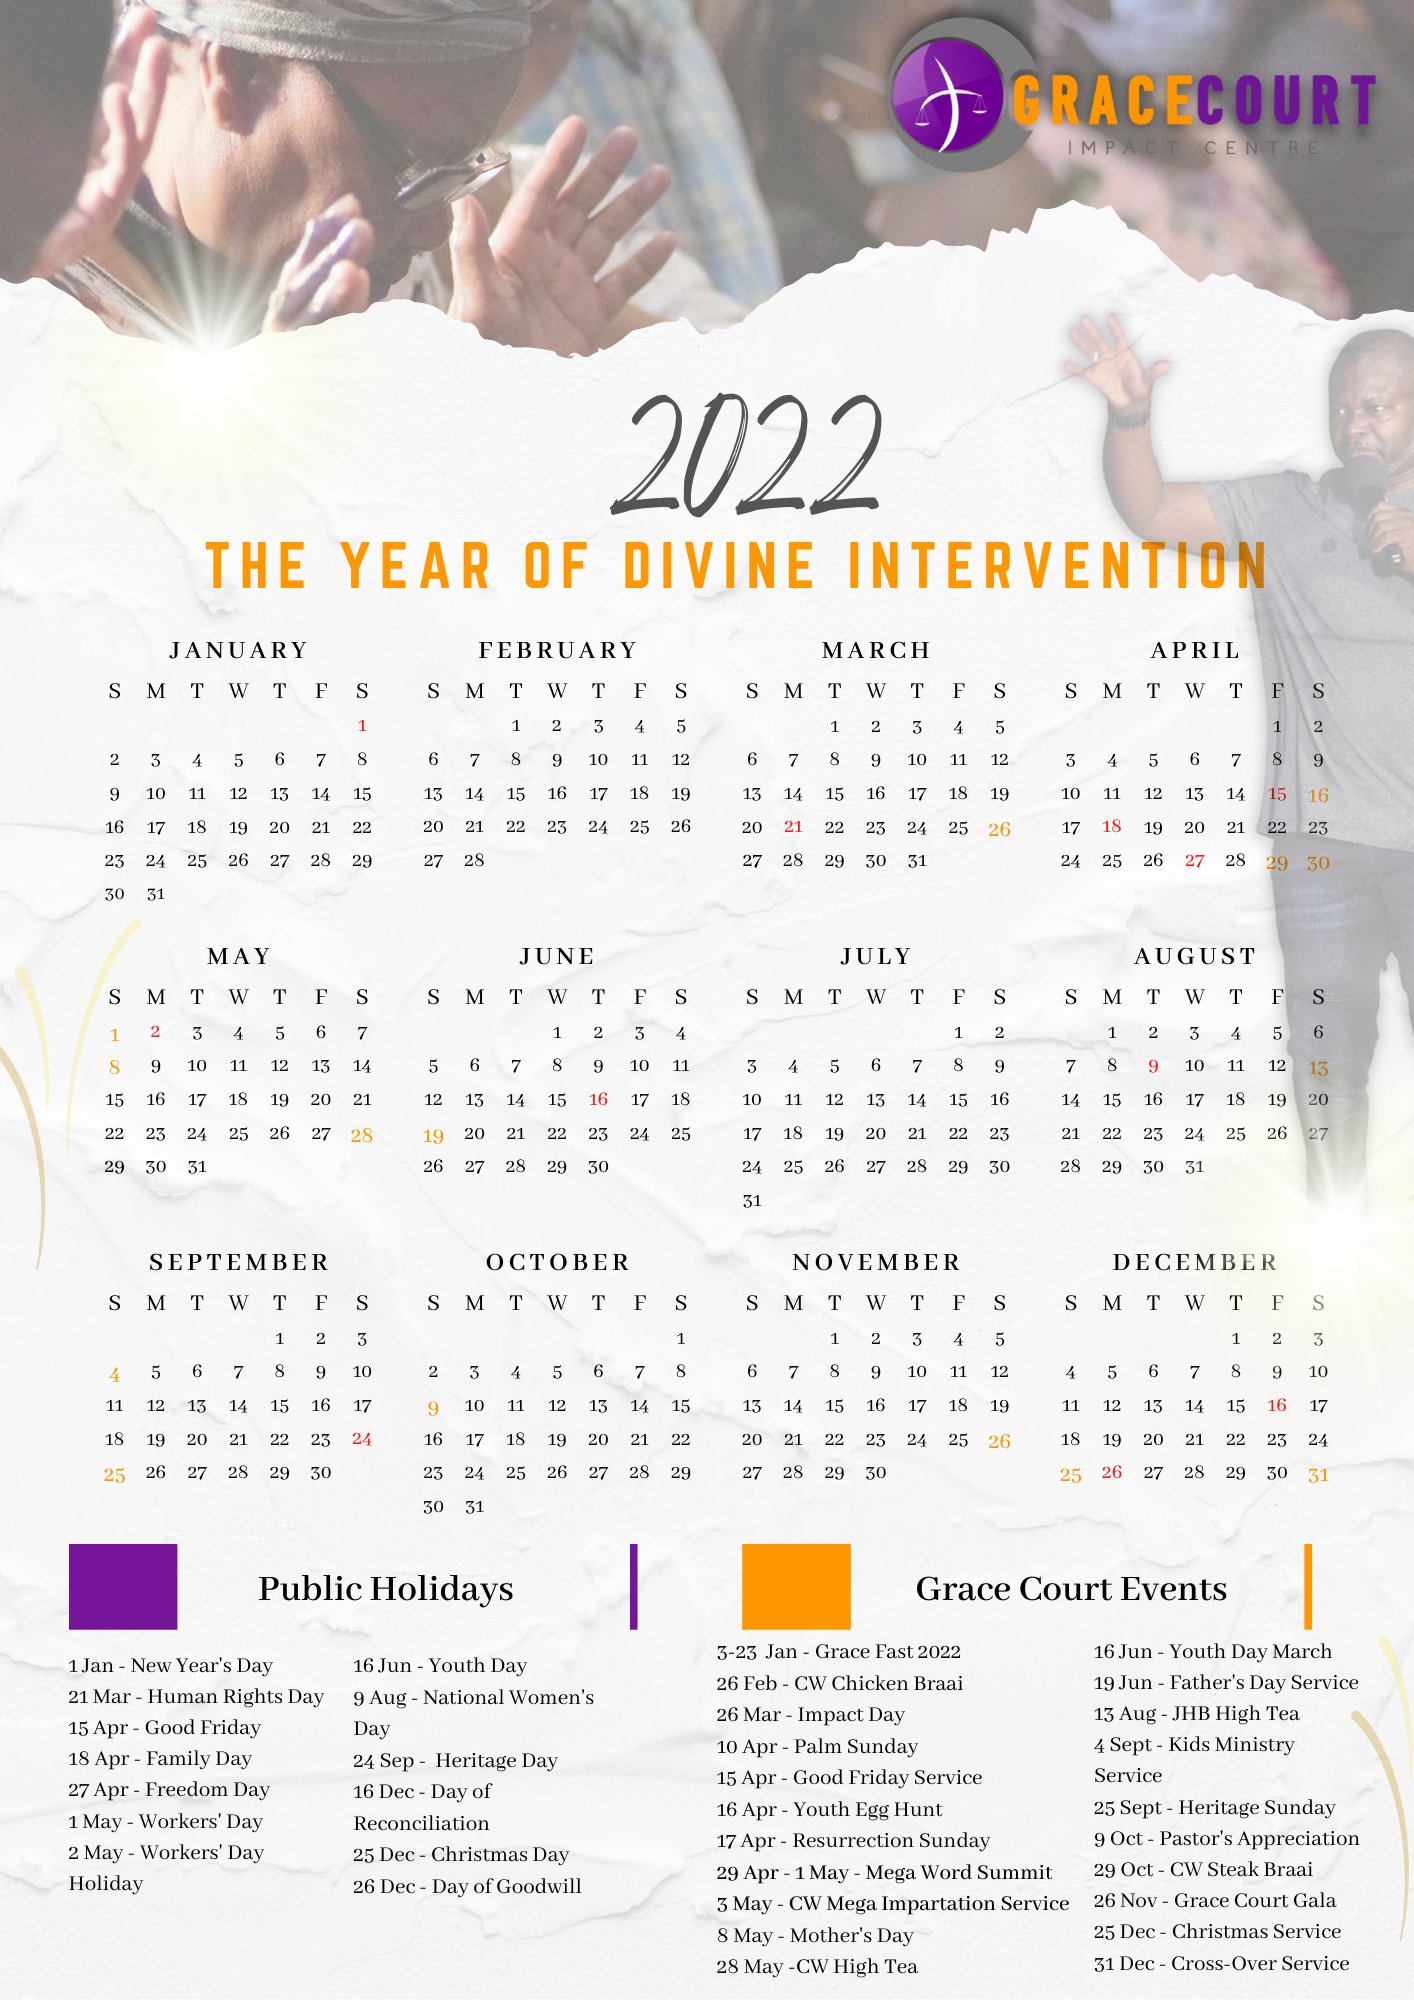 Goodwill Calendar 2022 Grace Court Impact Centre On Twitter: "Be Sure To Check Out And Download  The Grace Court Calendar For 2022. Mark The Important Dates And Be Part Of  The Year Of Divine Intervention!